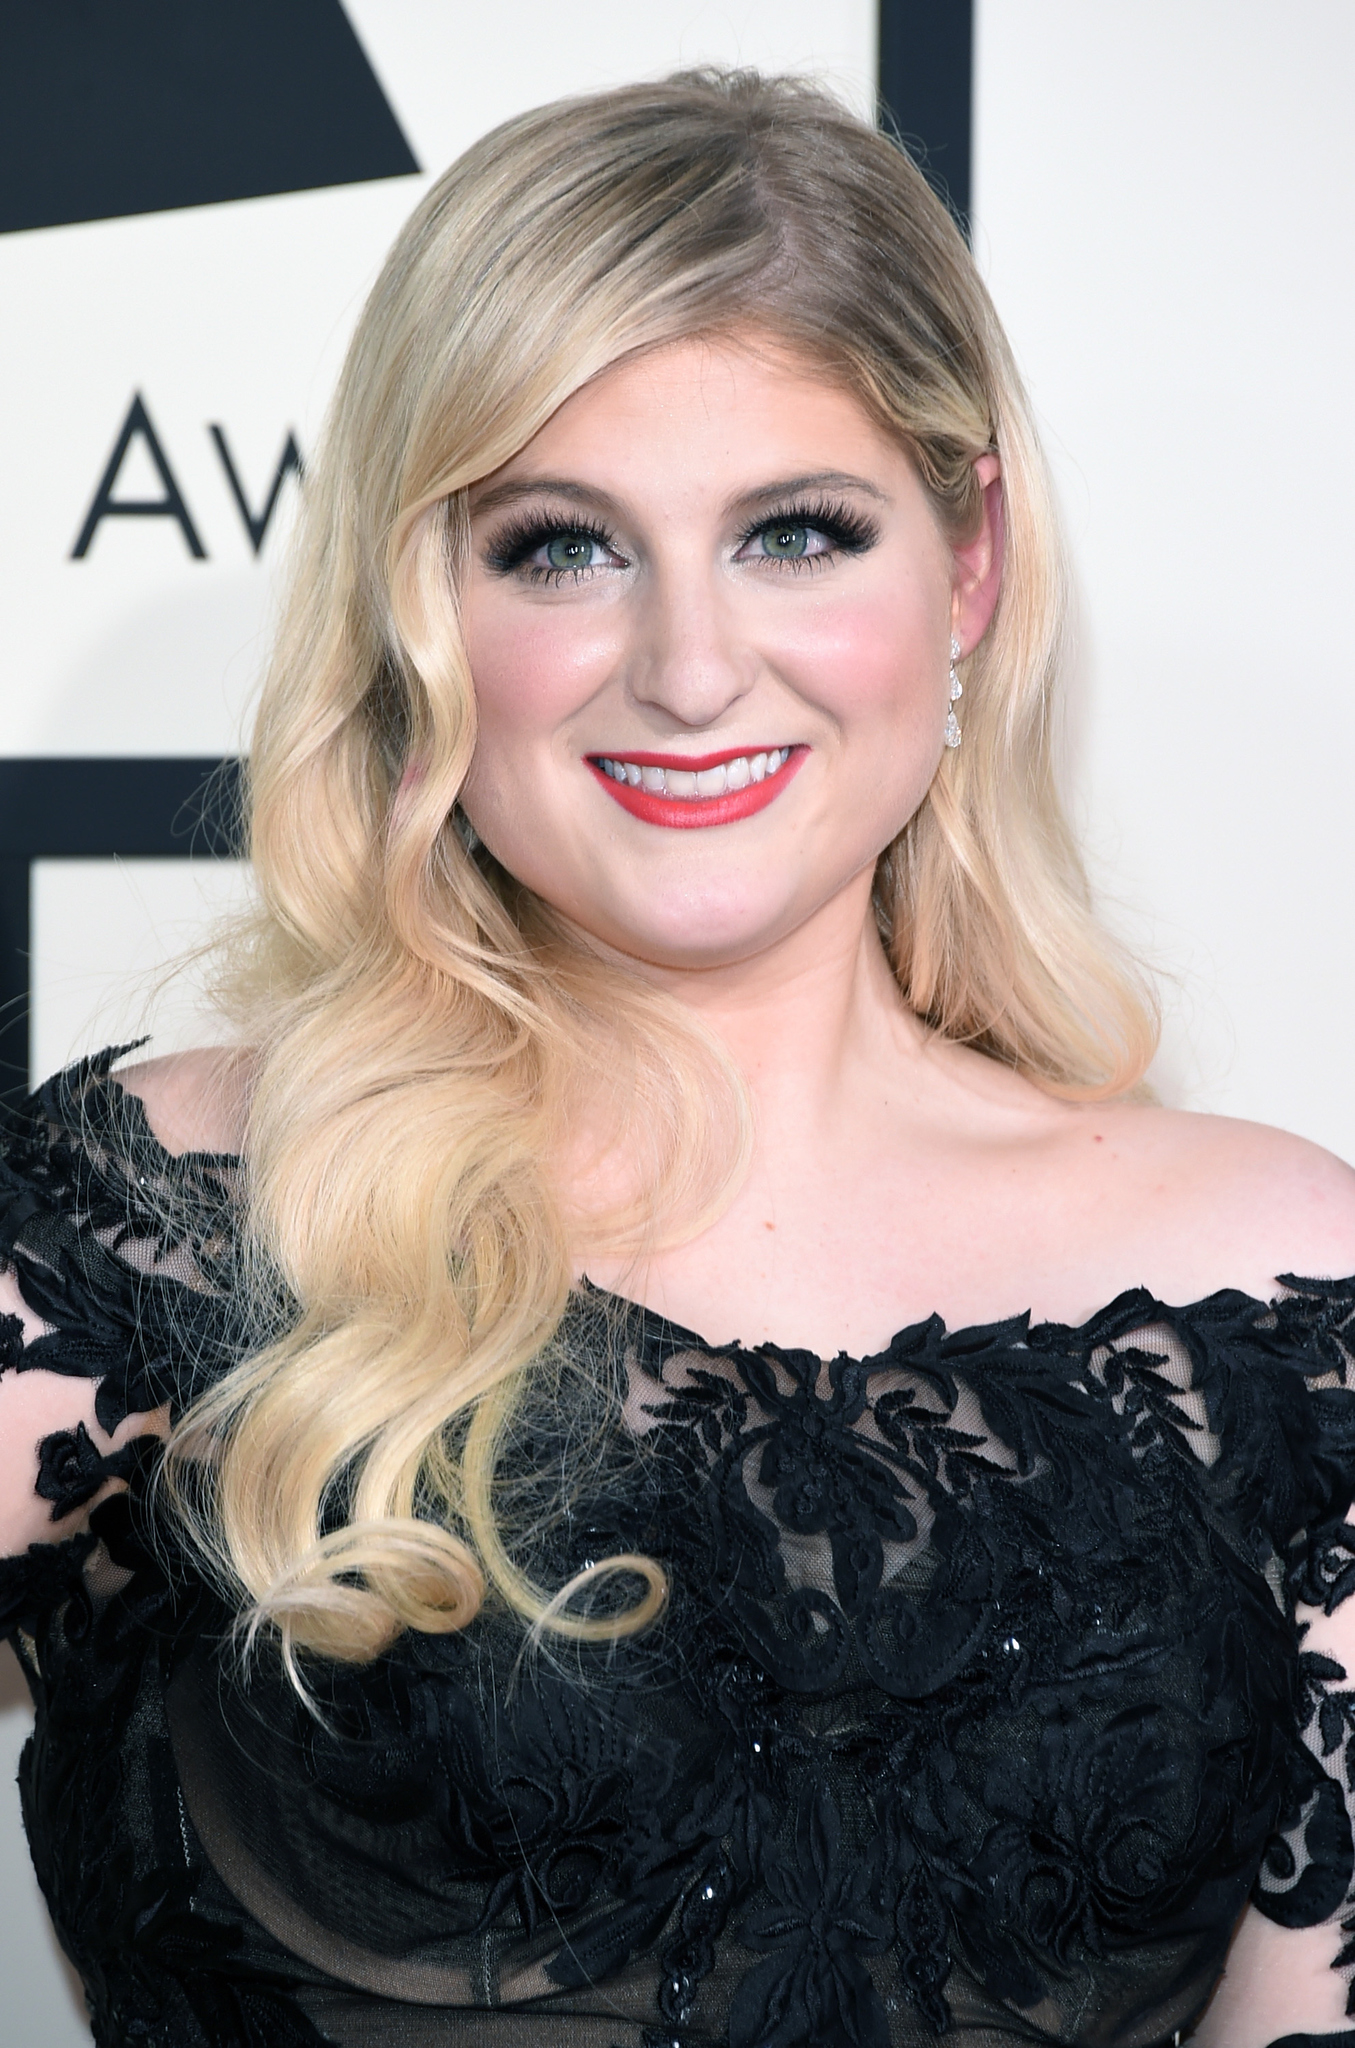 Meghan Trainor in The 57th Annual Grammy Awards (2015)